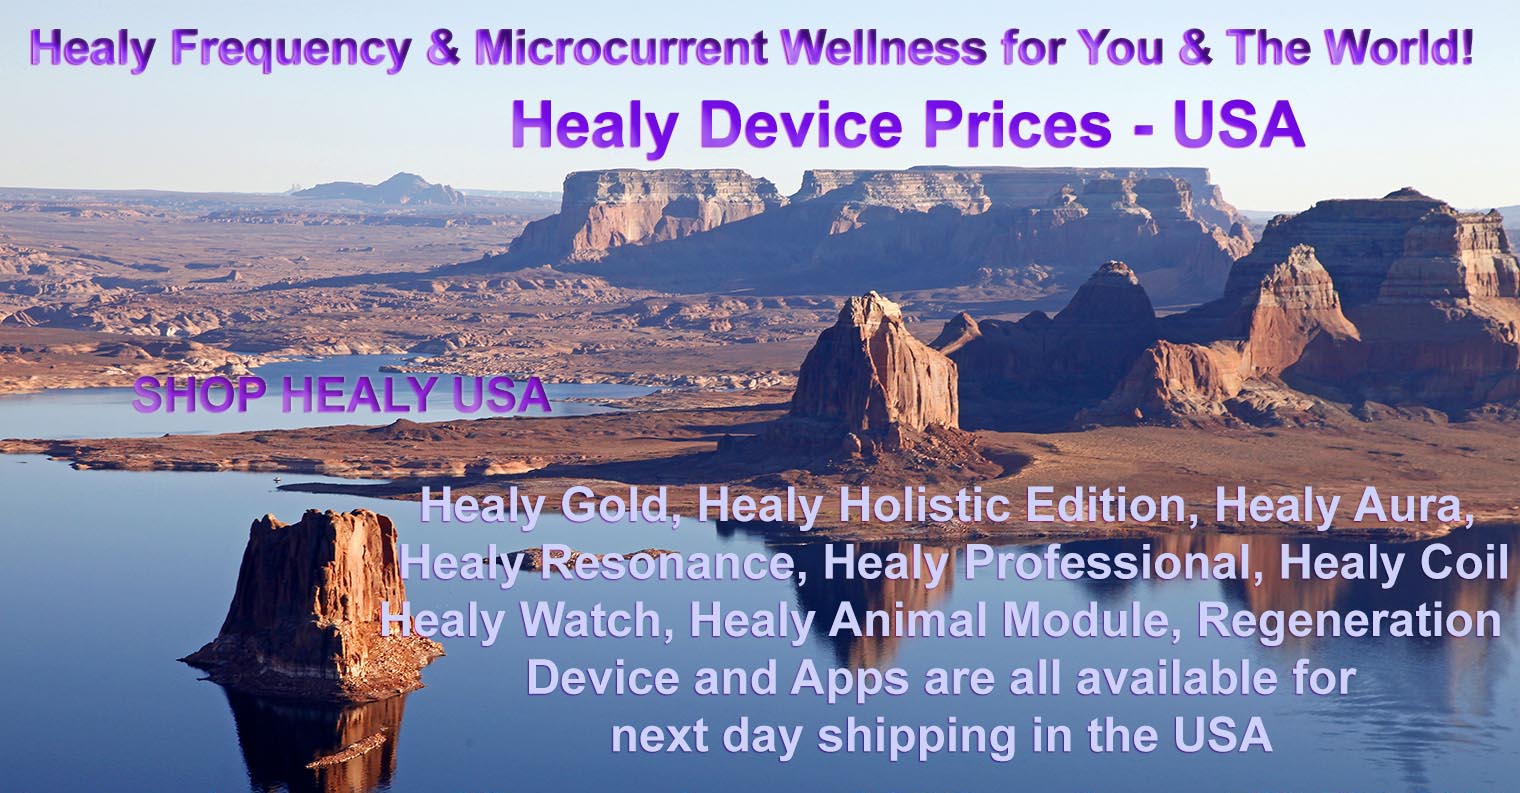 HealAdvisor Bioenergetic Vitalization, healAdvisor bioenergetic vitalization, group, groups, Group, Groups, Apps USA, Healy, Member, Store, Shop Healy Device Prices Cost, modules, healy programs, healy apps, Program Group, program group, Program Groups, program groups, healy app